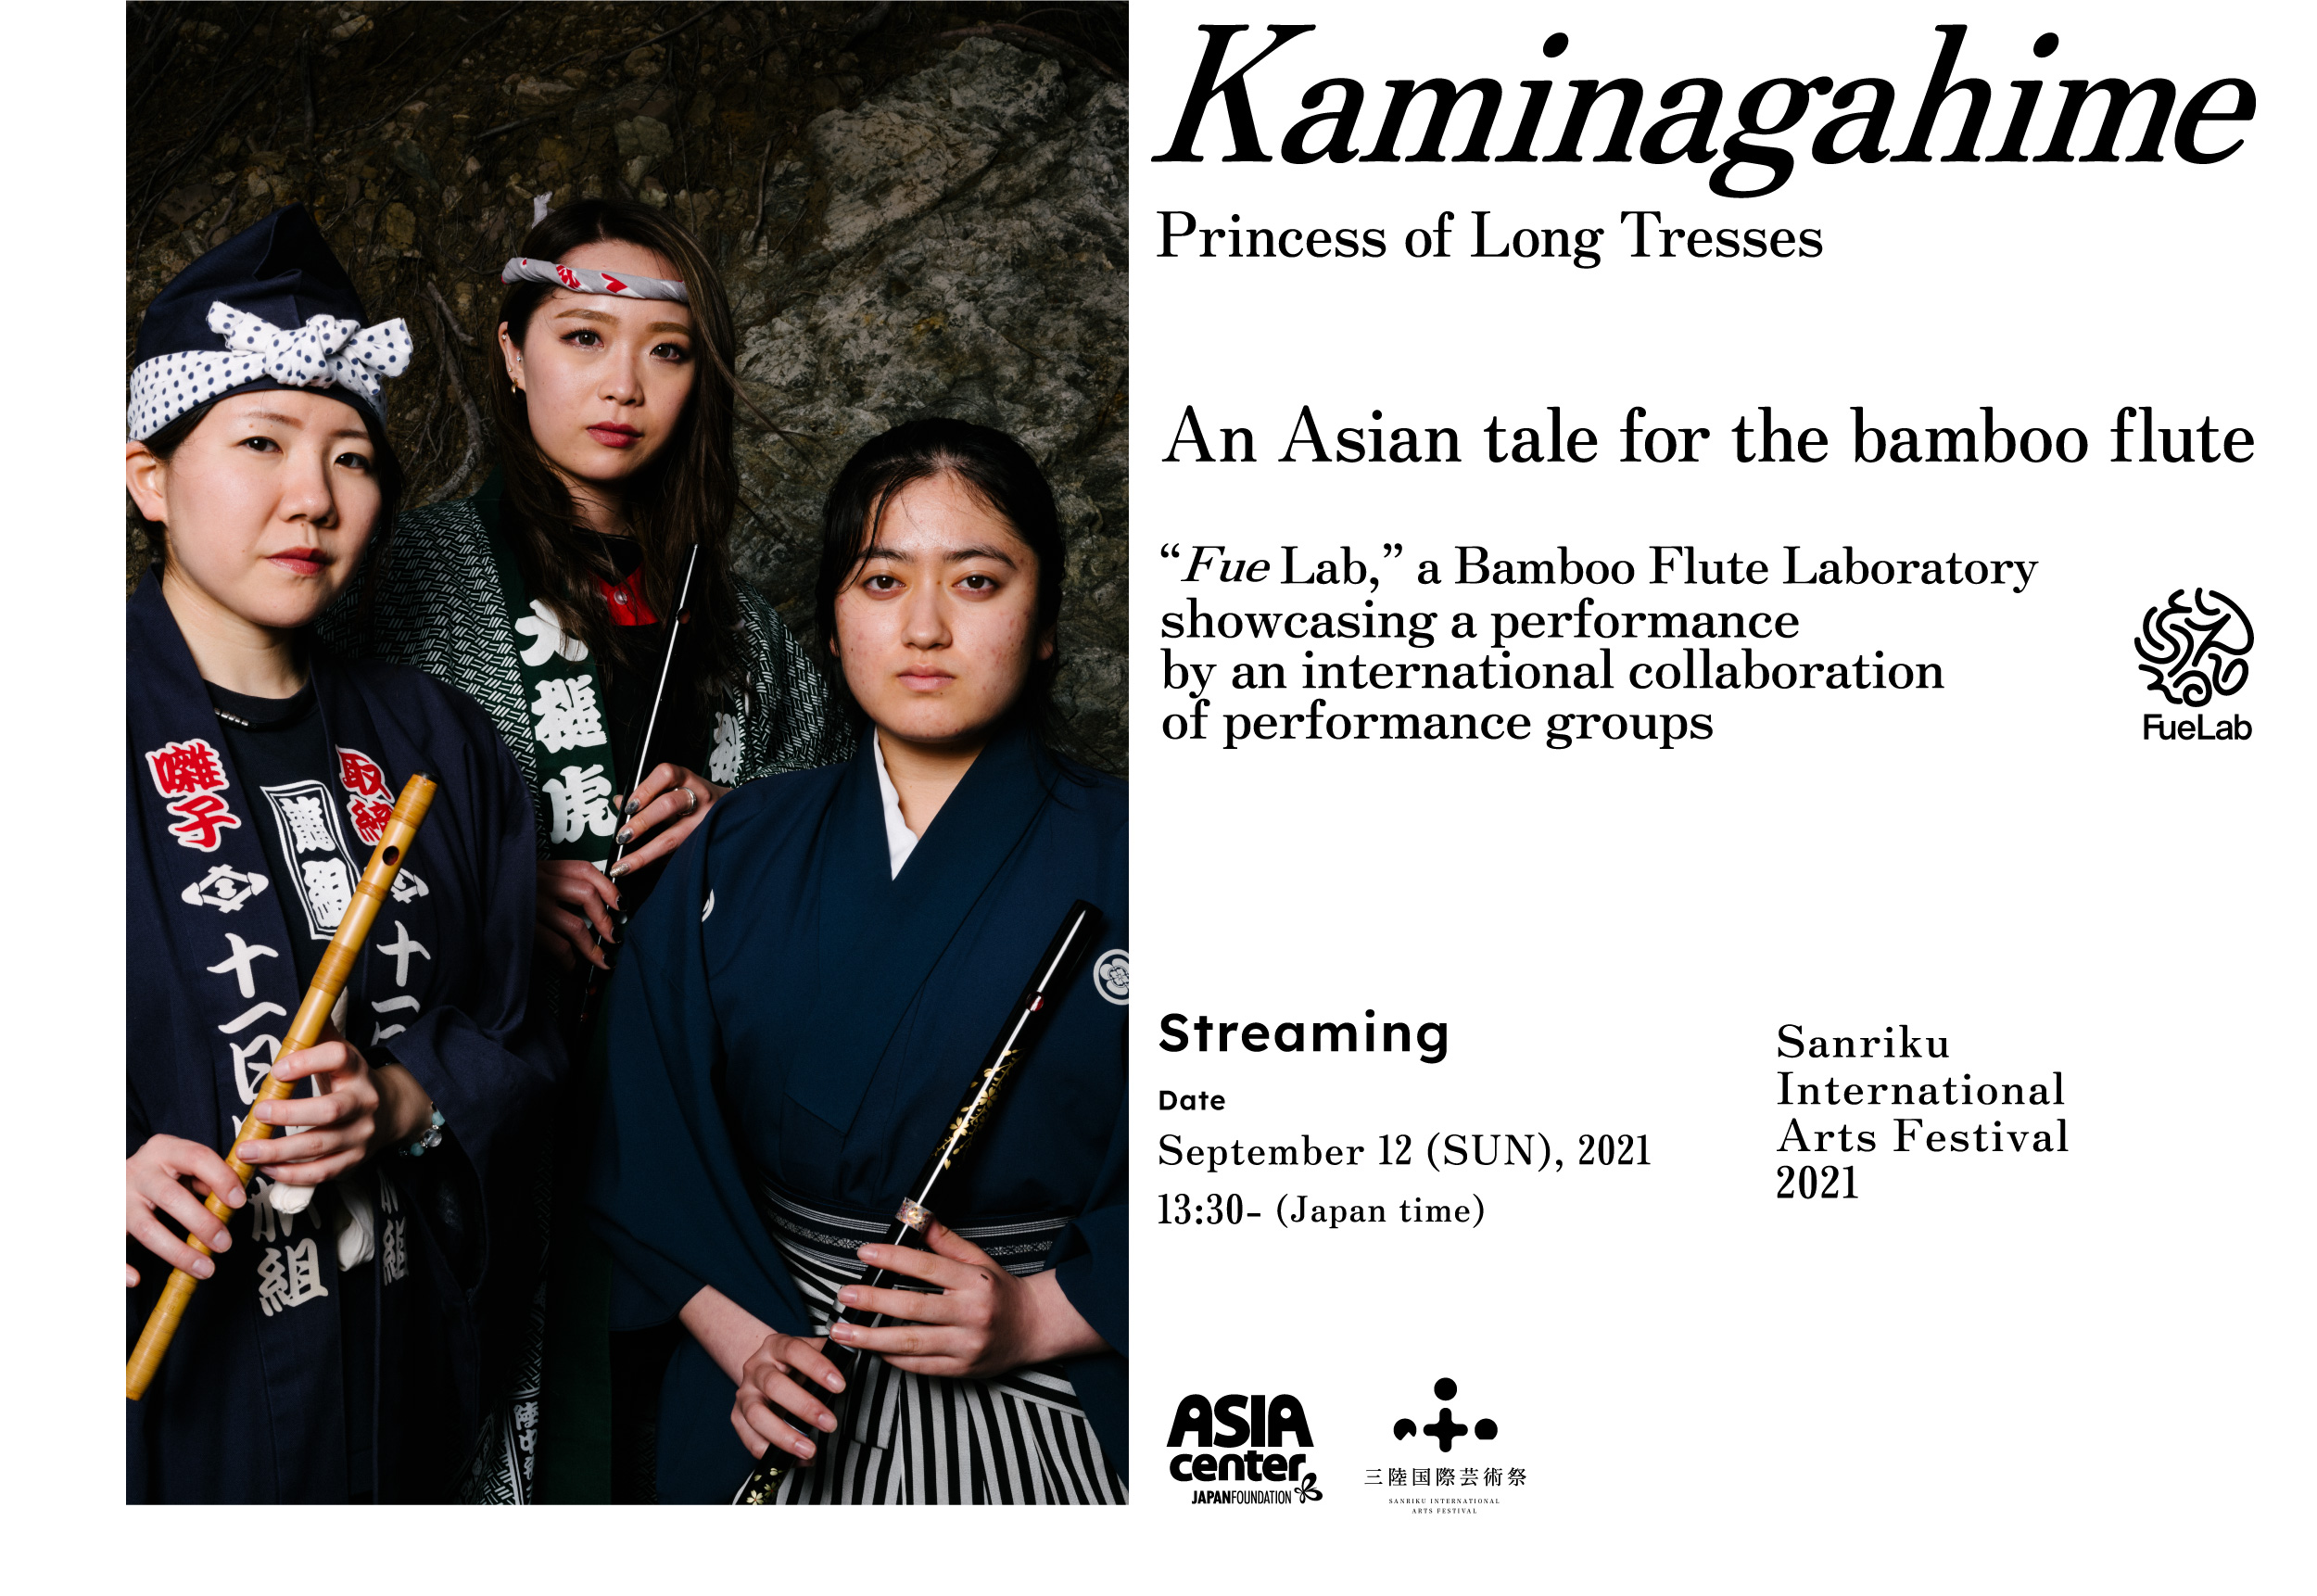 Kaminagahime. Princess of Long Tresses. An Asian tale for the bamboo flute. “FueLab,” a Bamboo Flute Laboratory showcasing a performance by an international collaboration of performance groups. Live stream Date Sunday, September 5, 2021 13:30-16:30 (Japan time) Sanriku International Arts Festival 2021